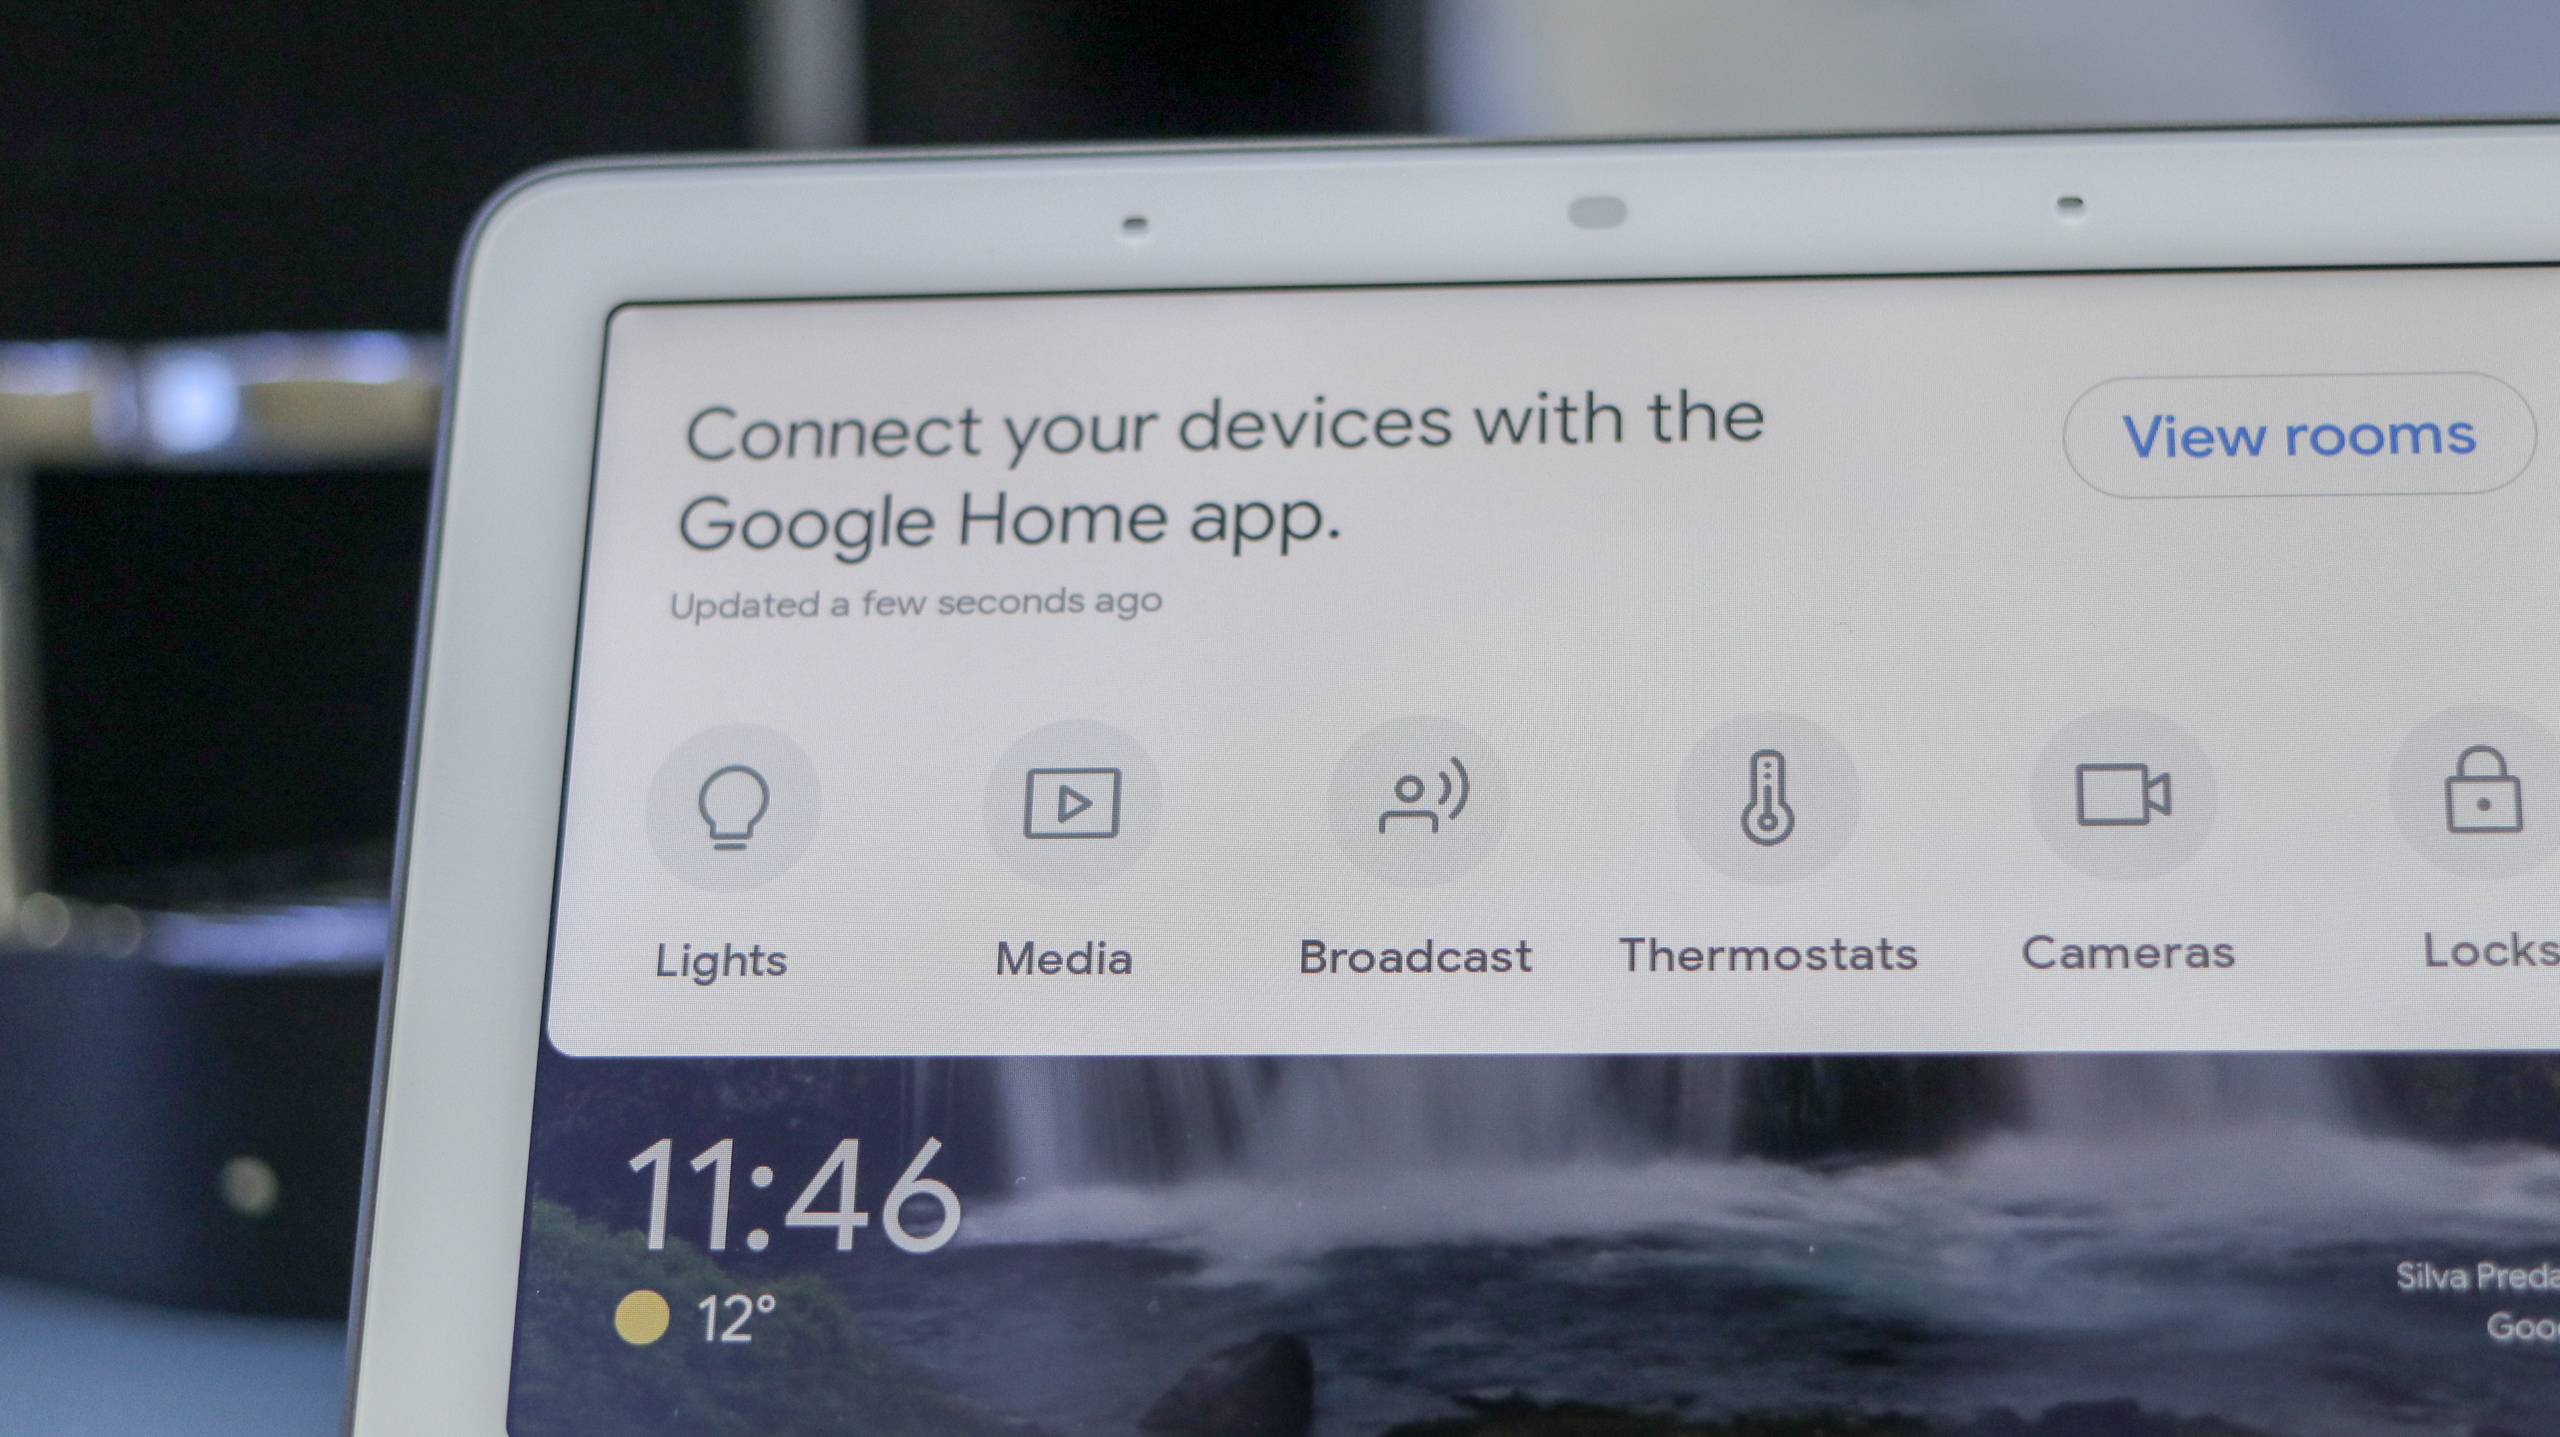 A close-up photo of the Google Home hub's screen